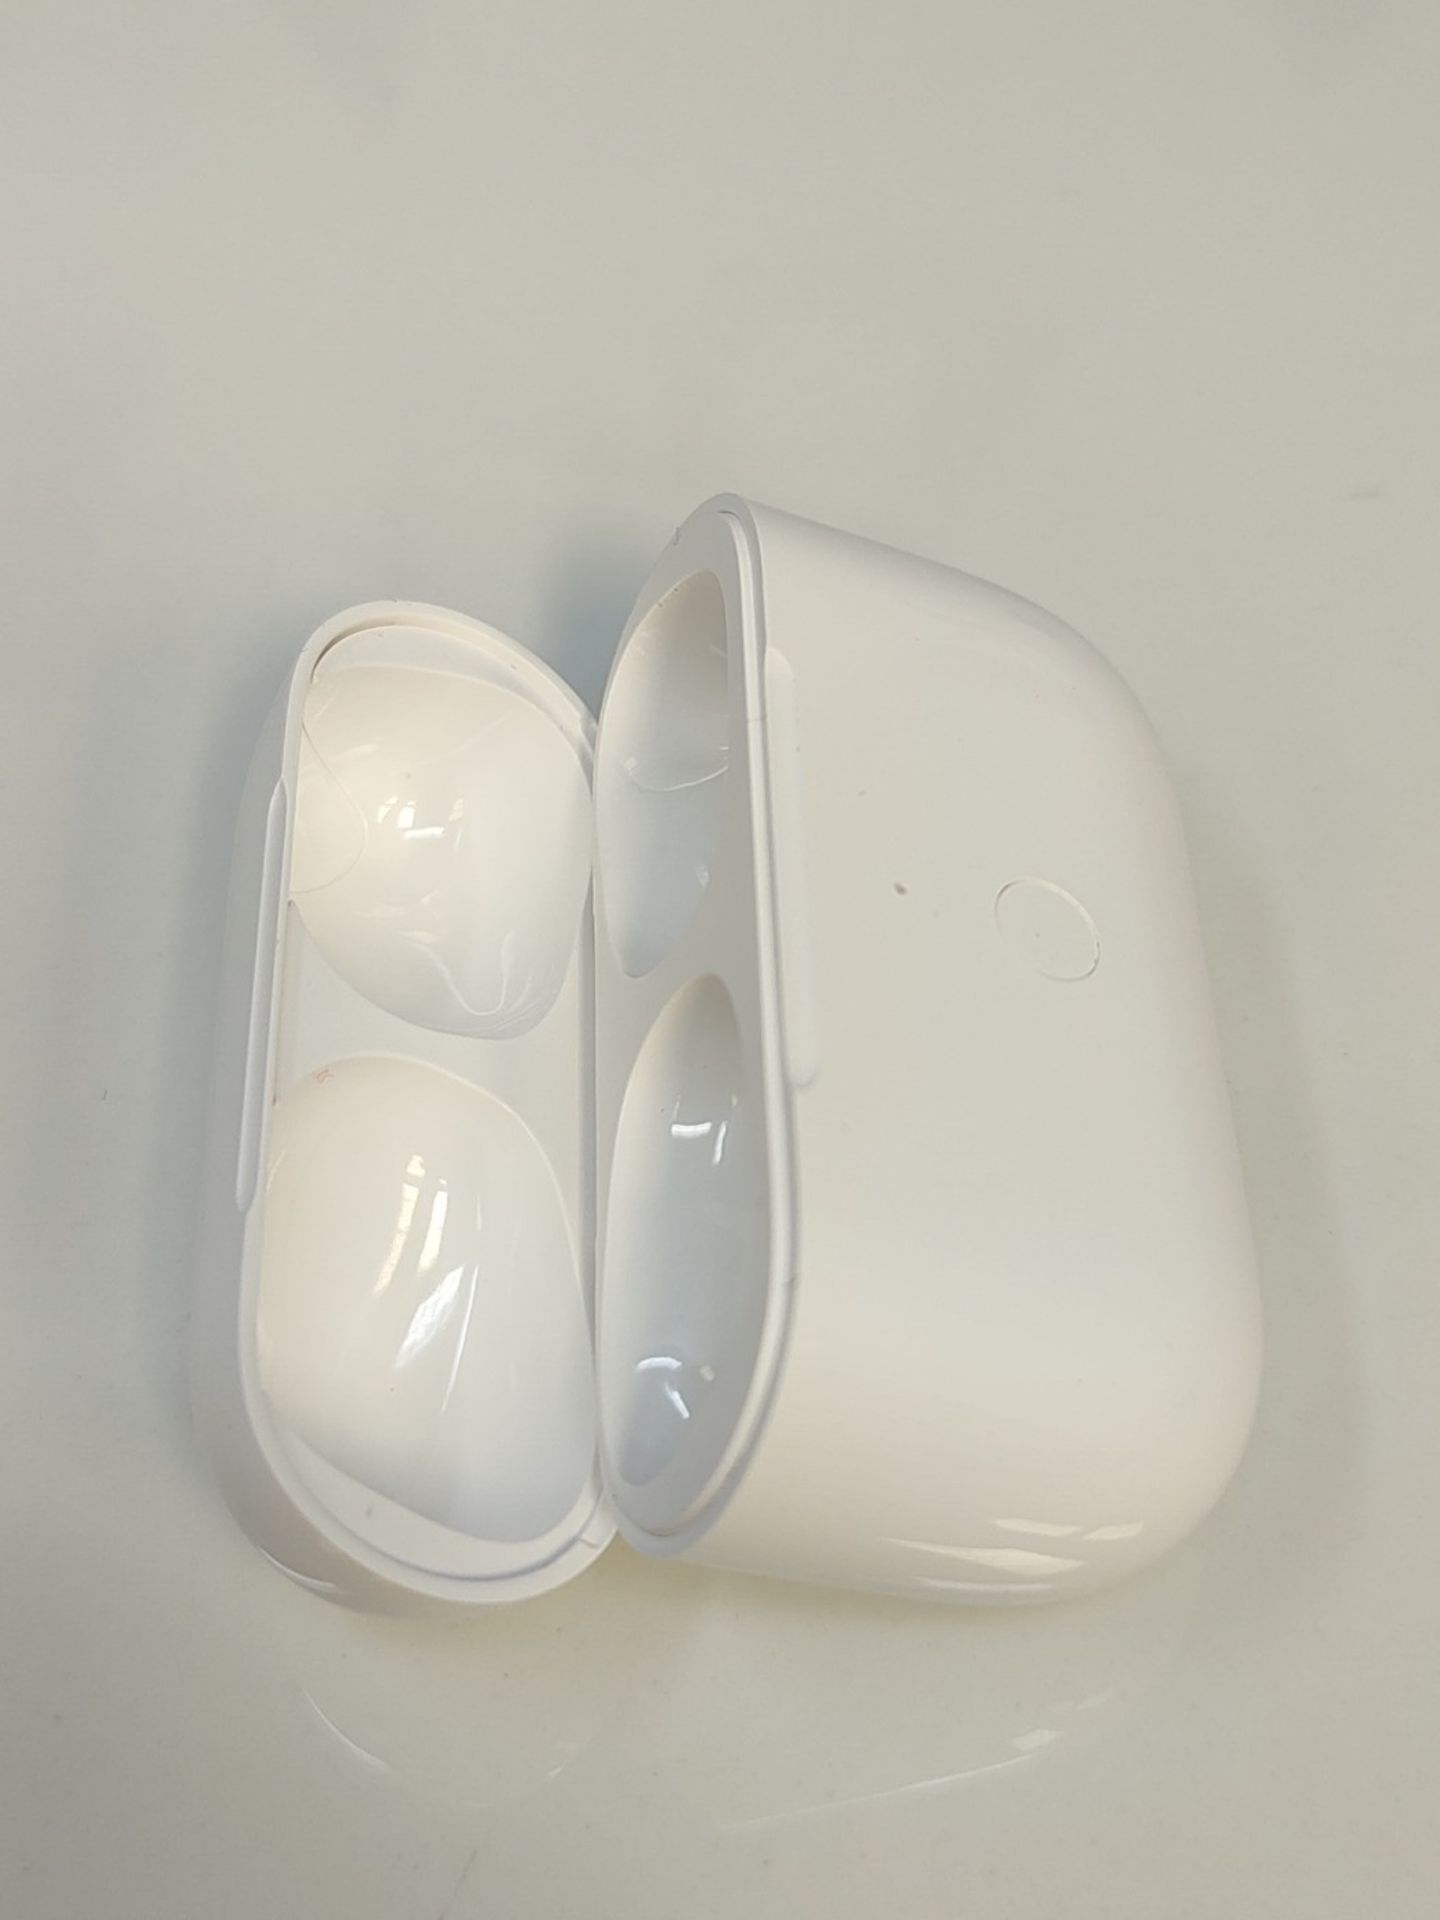 Wireless Charging Case for AirPods Pro 1 and AirPods Pro 2, Replacement Charging Case - Image 3 of 3